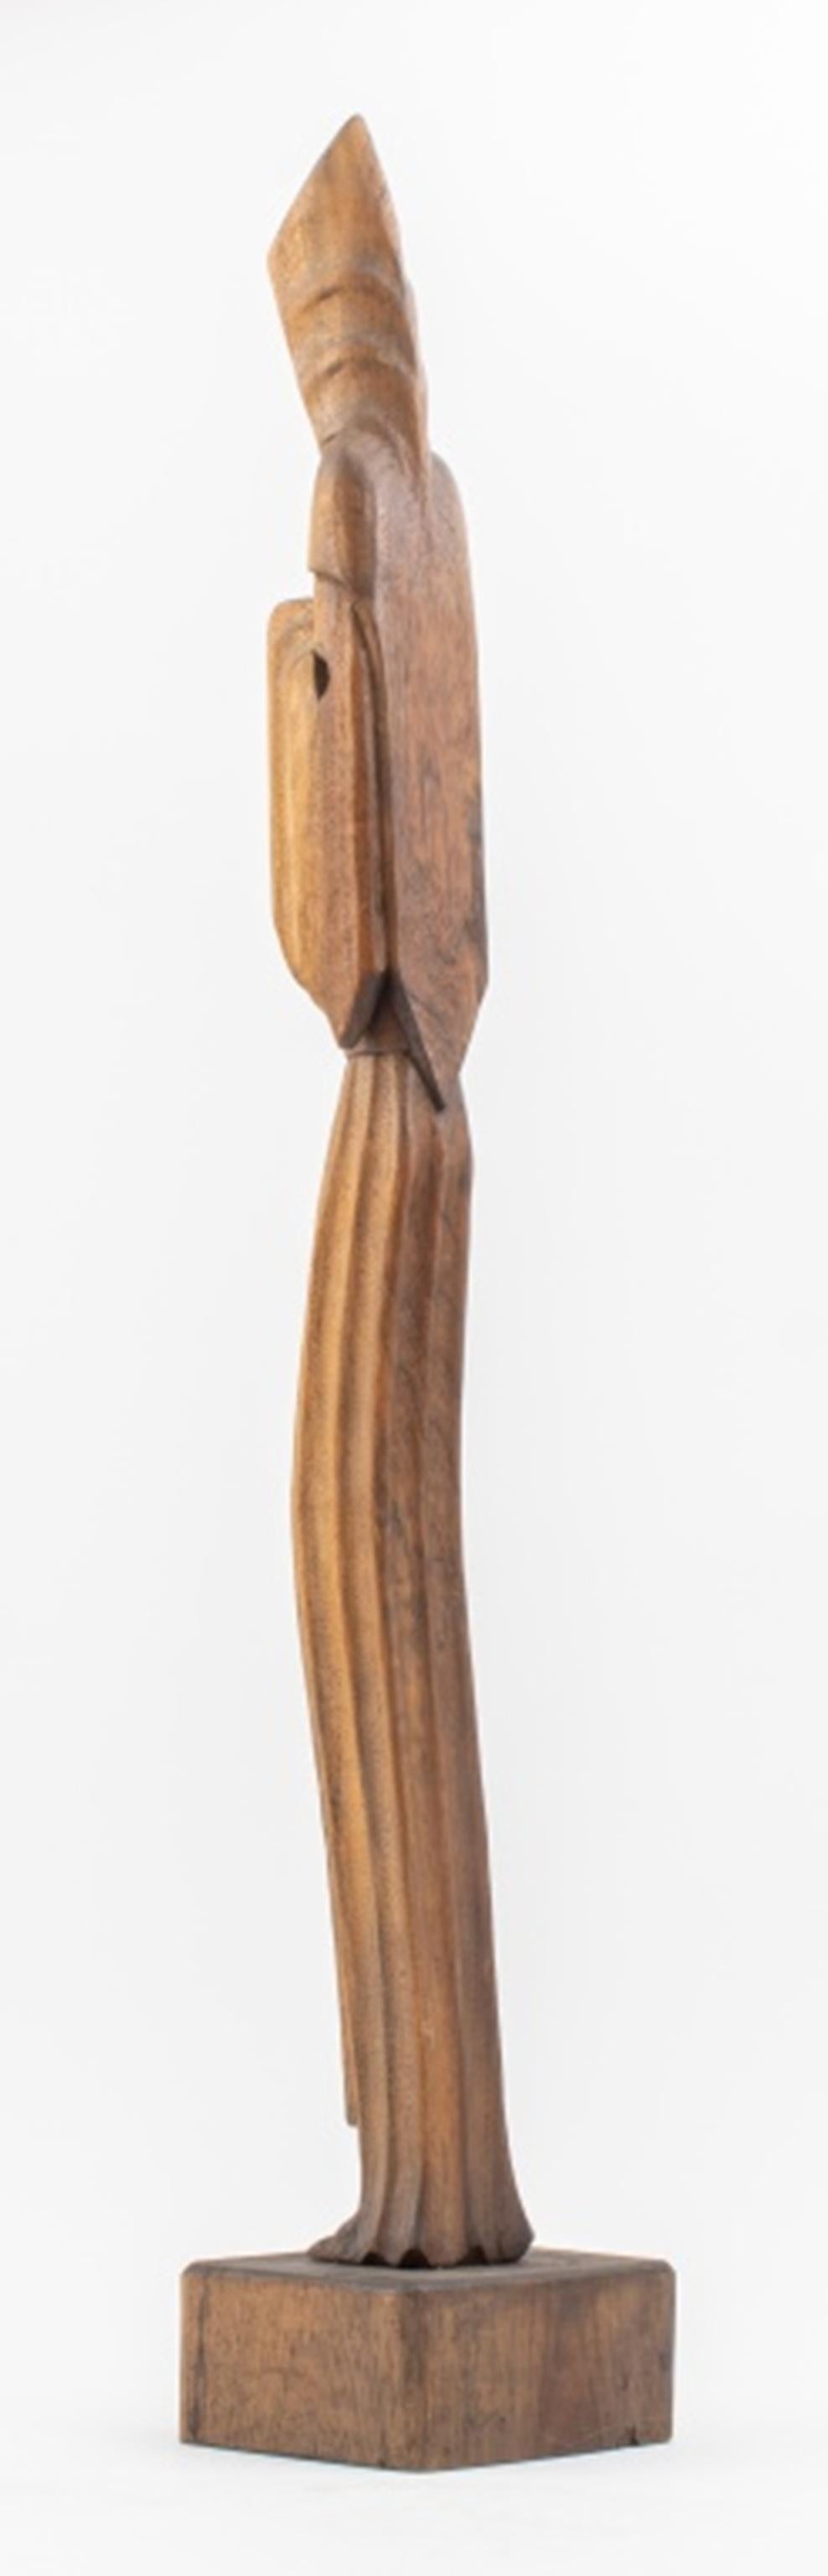 20th Century Paraguayan Modern Hooded Monk Wood Sculpture For Sale